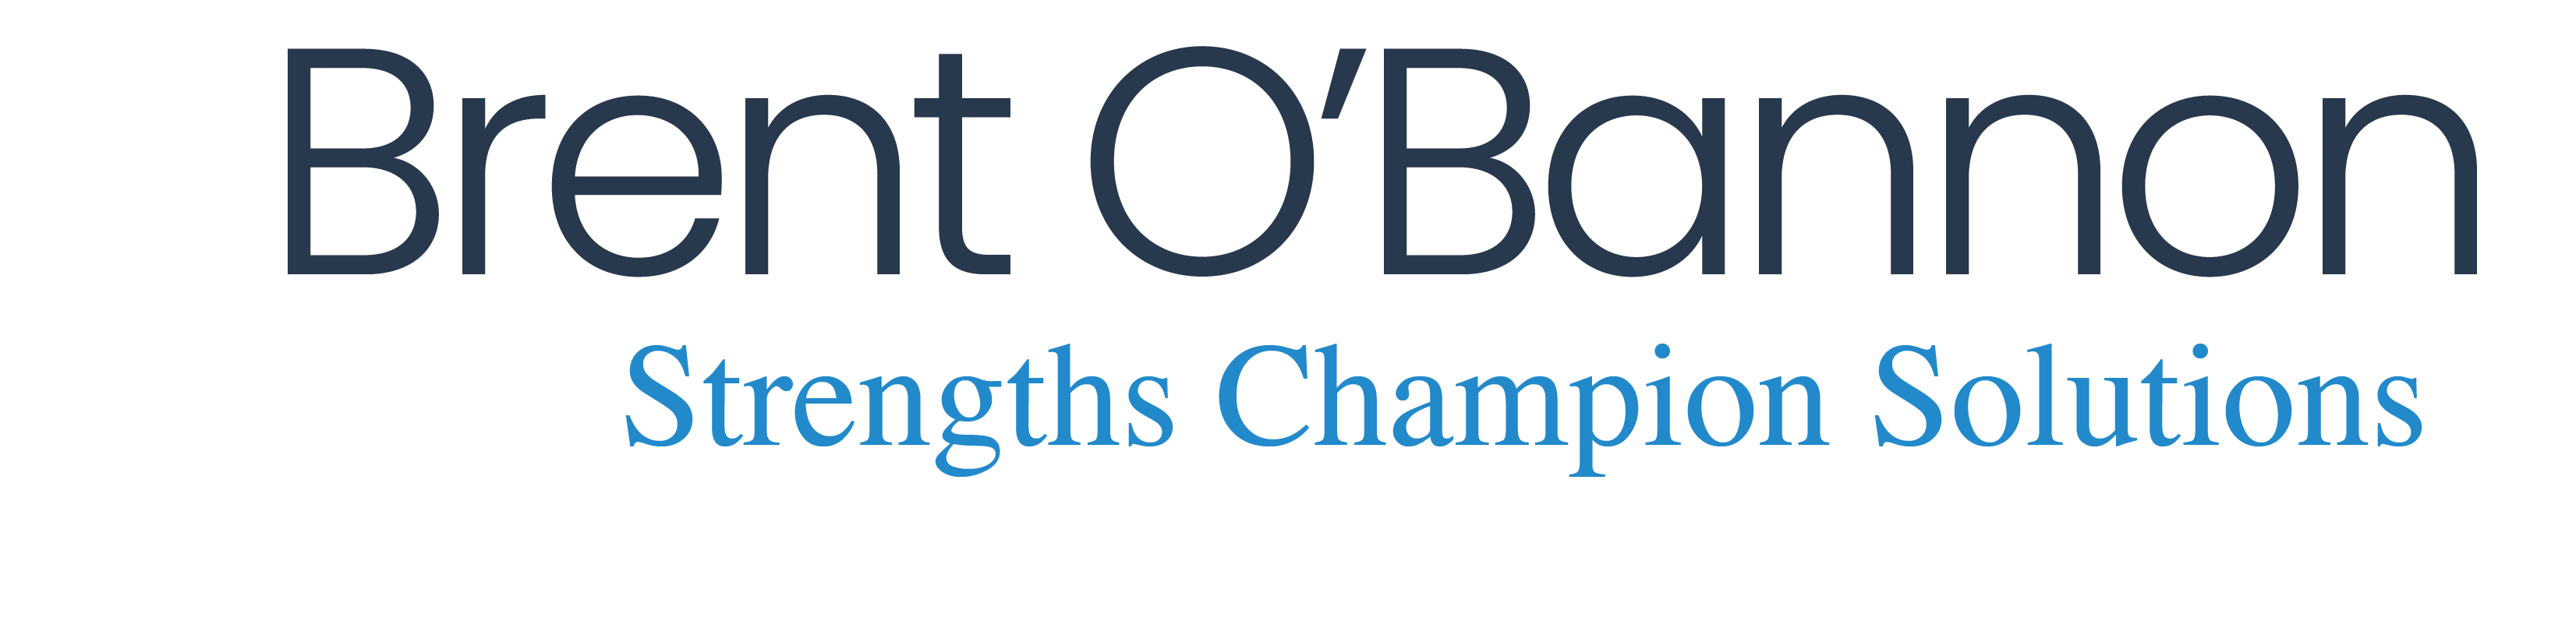 Brent O'Bannon | Strengths Champion Solutions